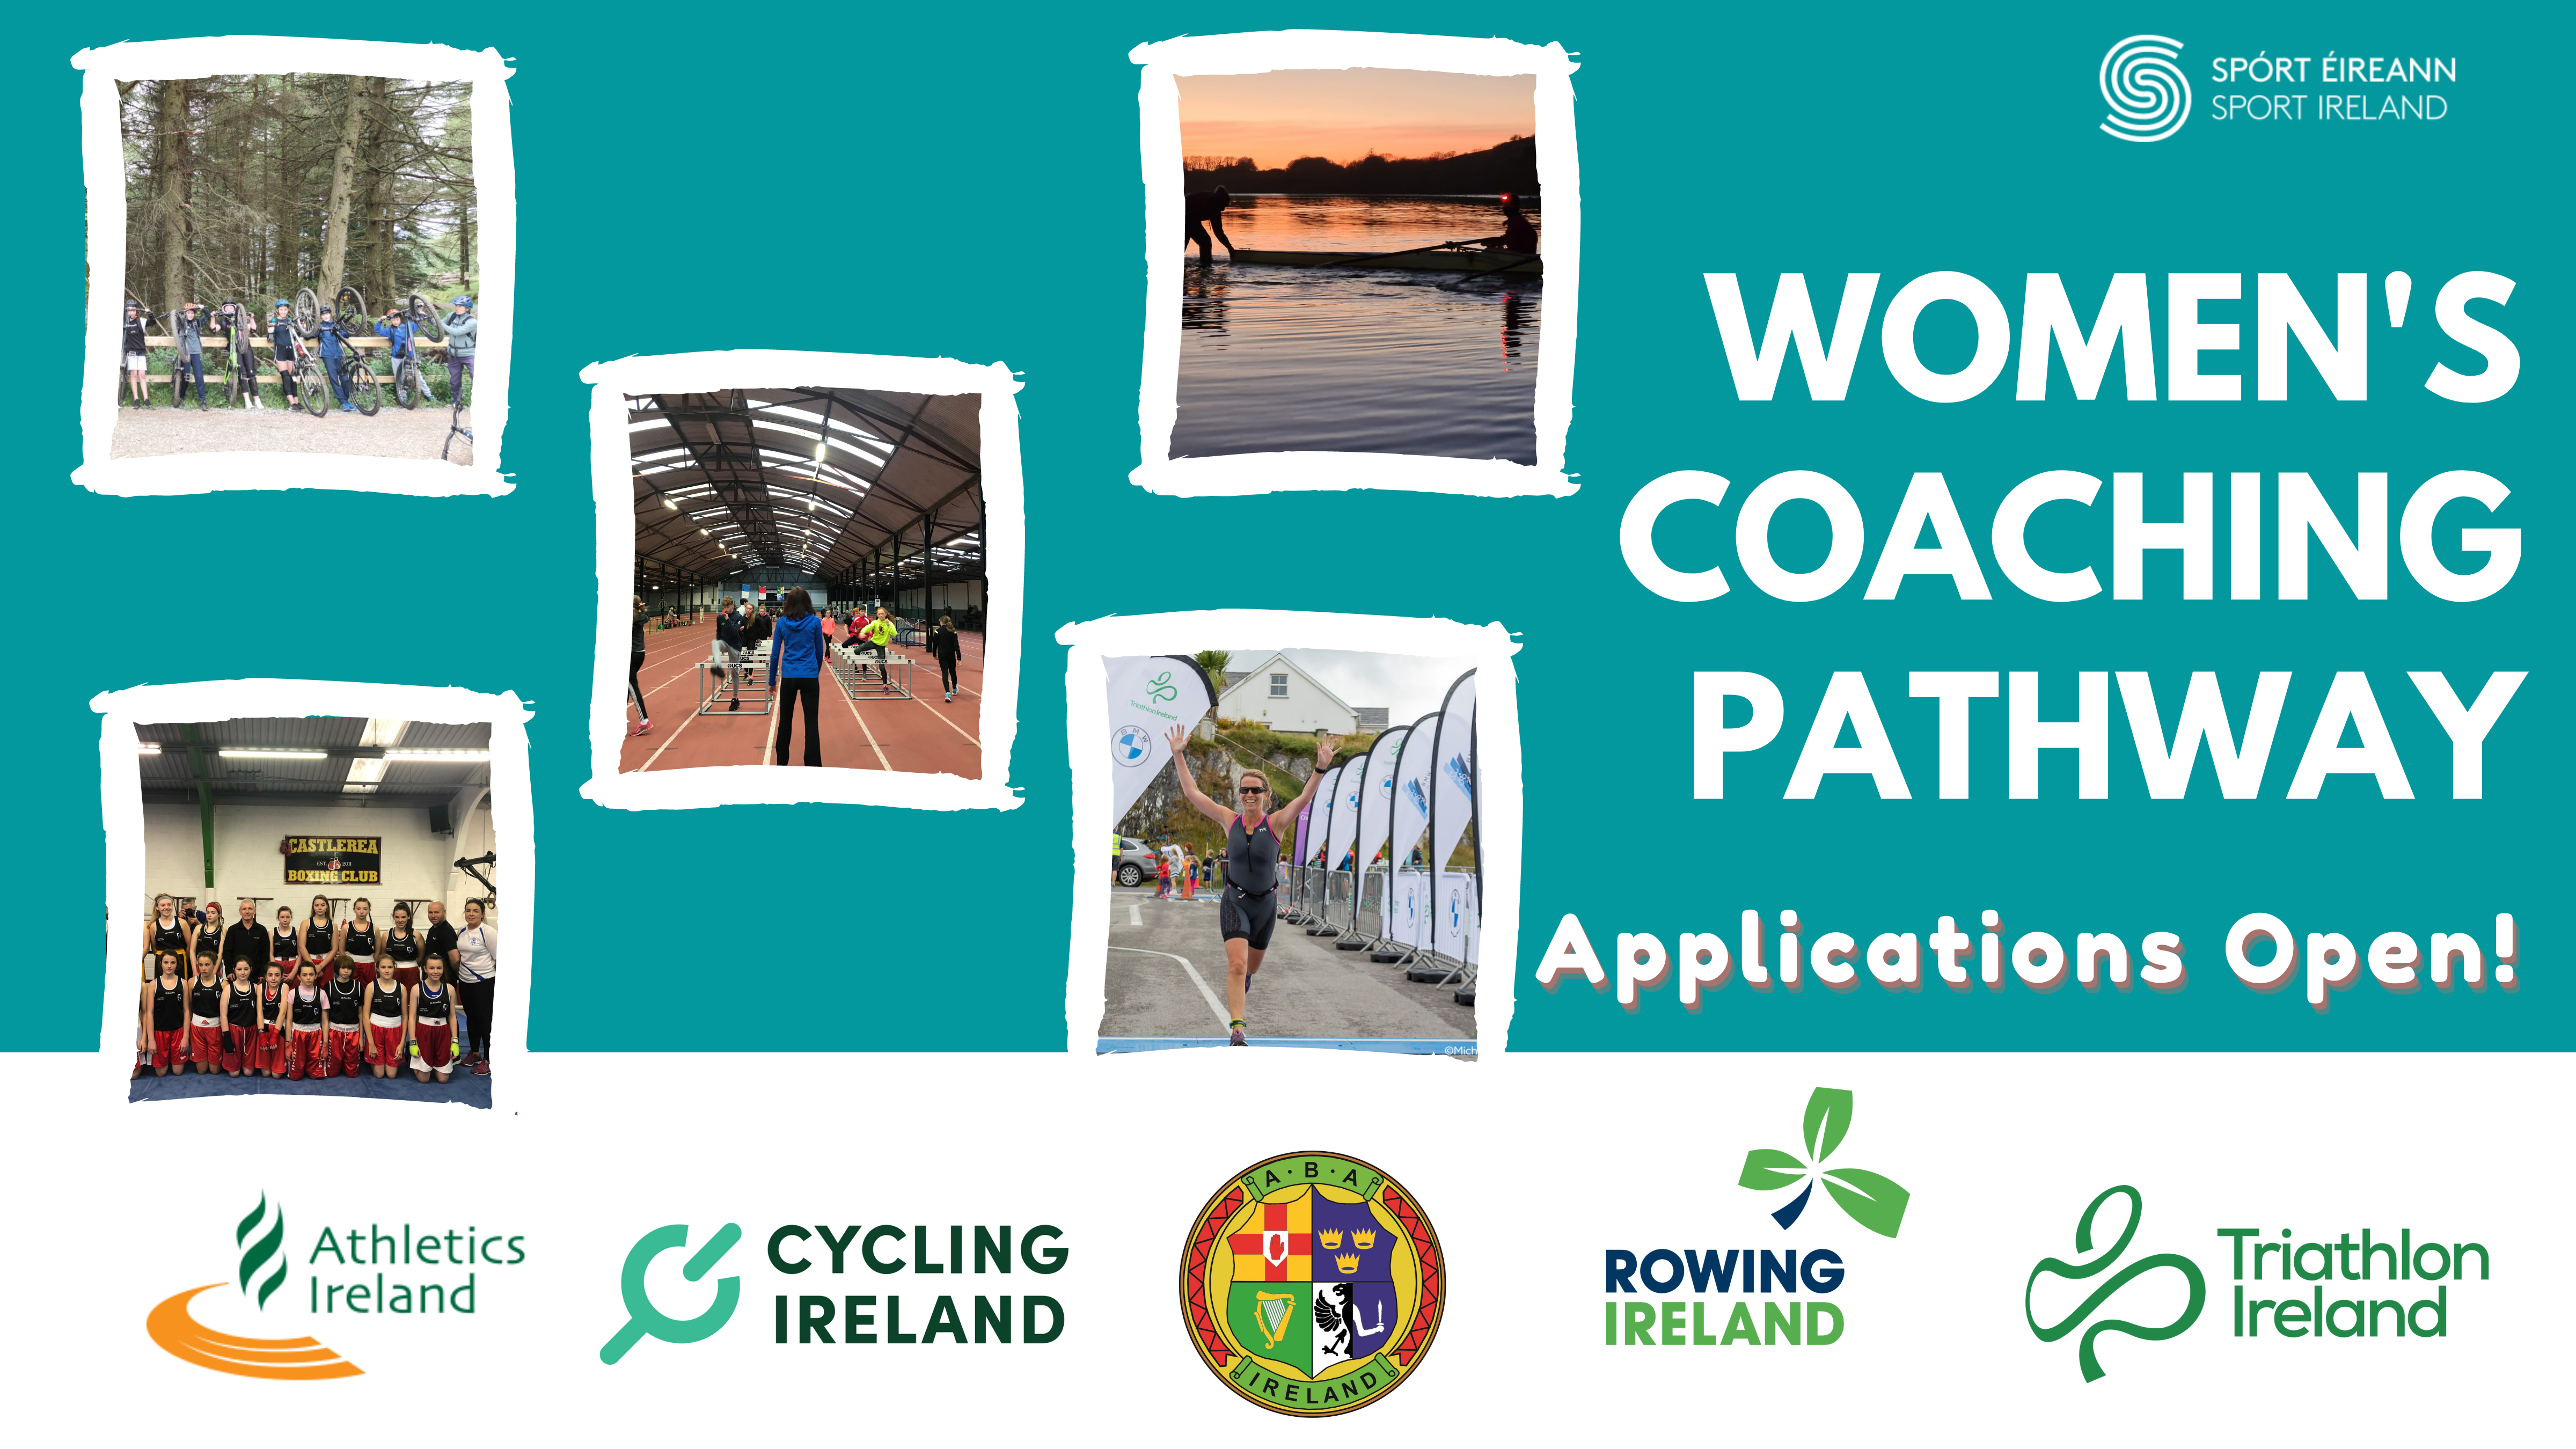 Applications are now open for the Women’s Coaching Pathway 2021